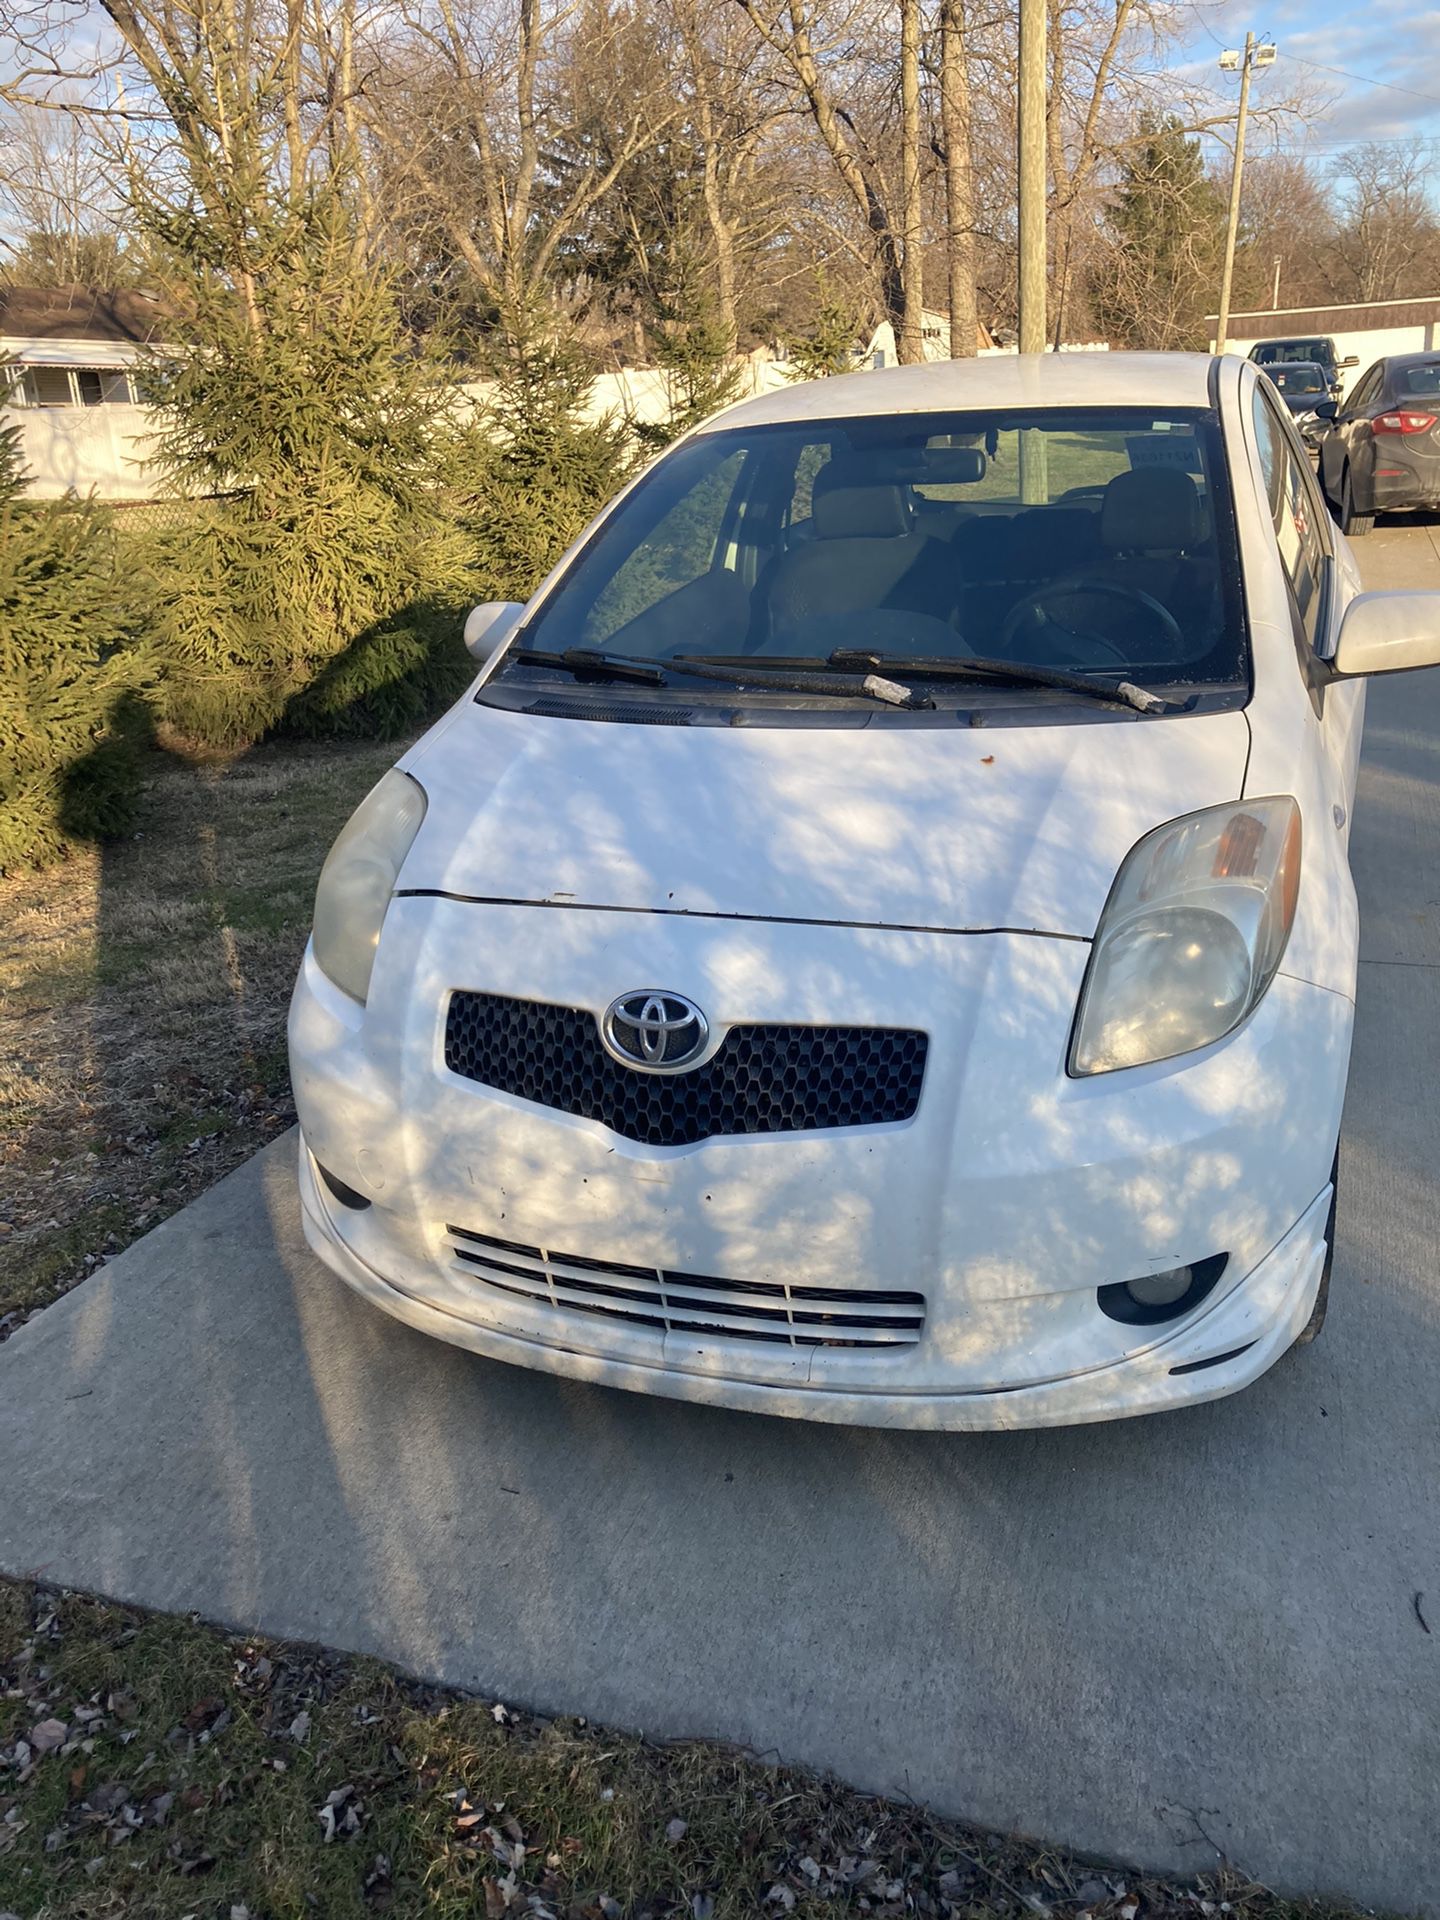 2008 Toyota Yaris for Sale in North Royalton, OH OfferUp